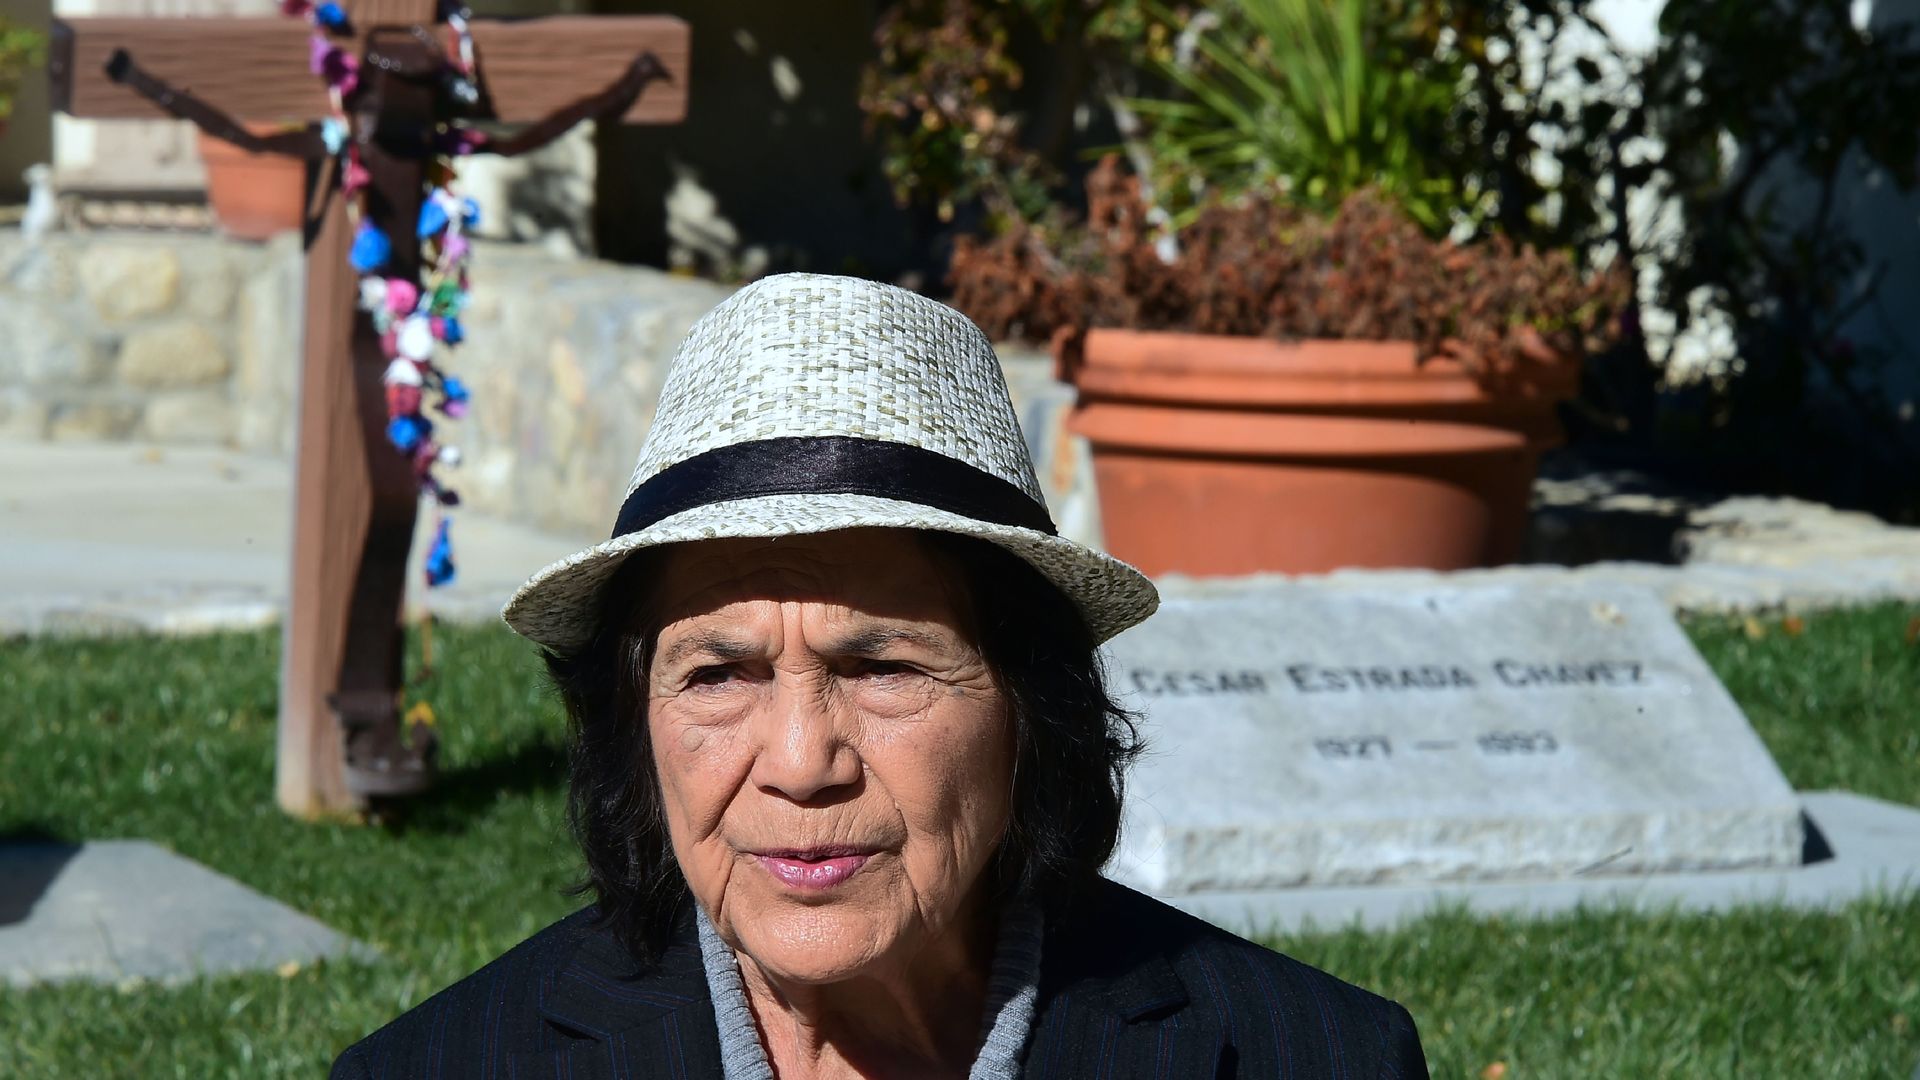 Civil rights activist Dolores Huerta visits the graves of Cesar and Helen Chavez at the César E. Chávez National Monument in Keene, California on January 31, 2017. 